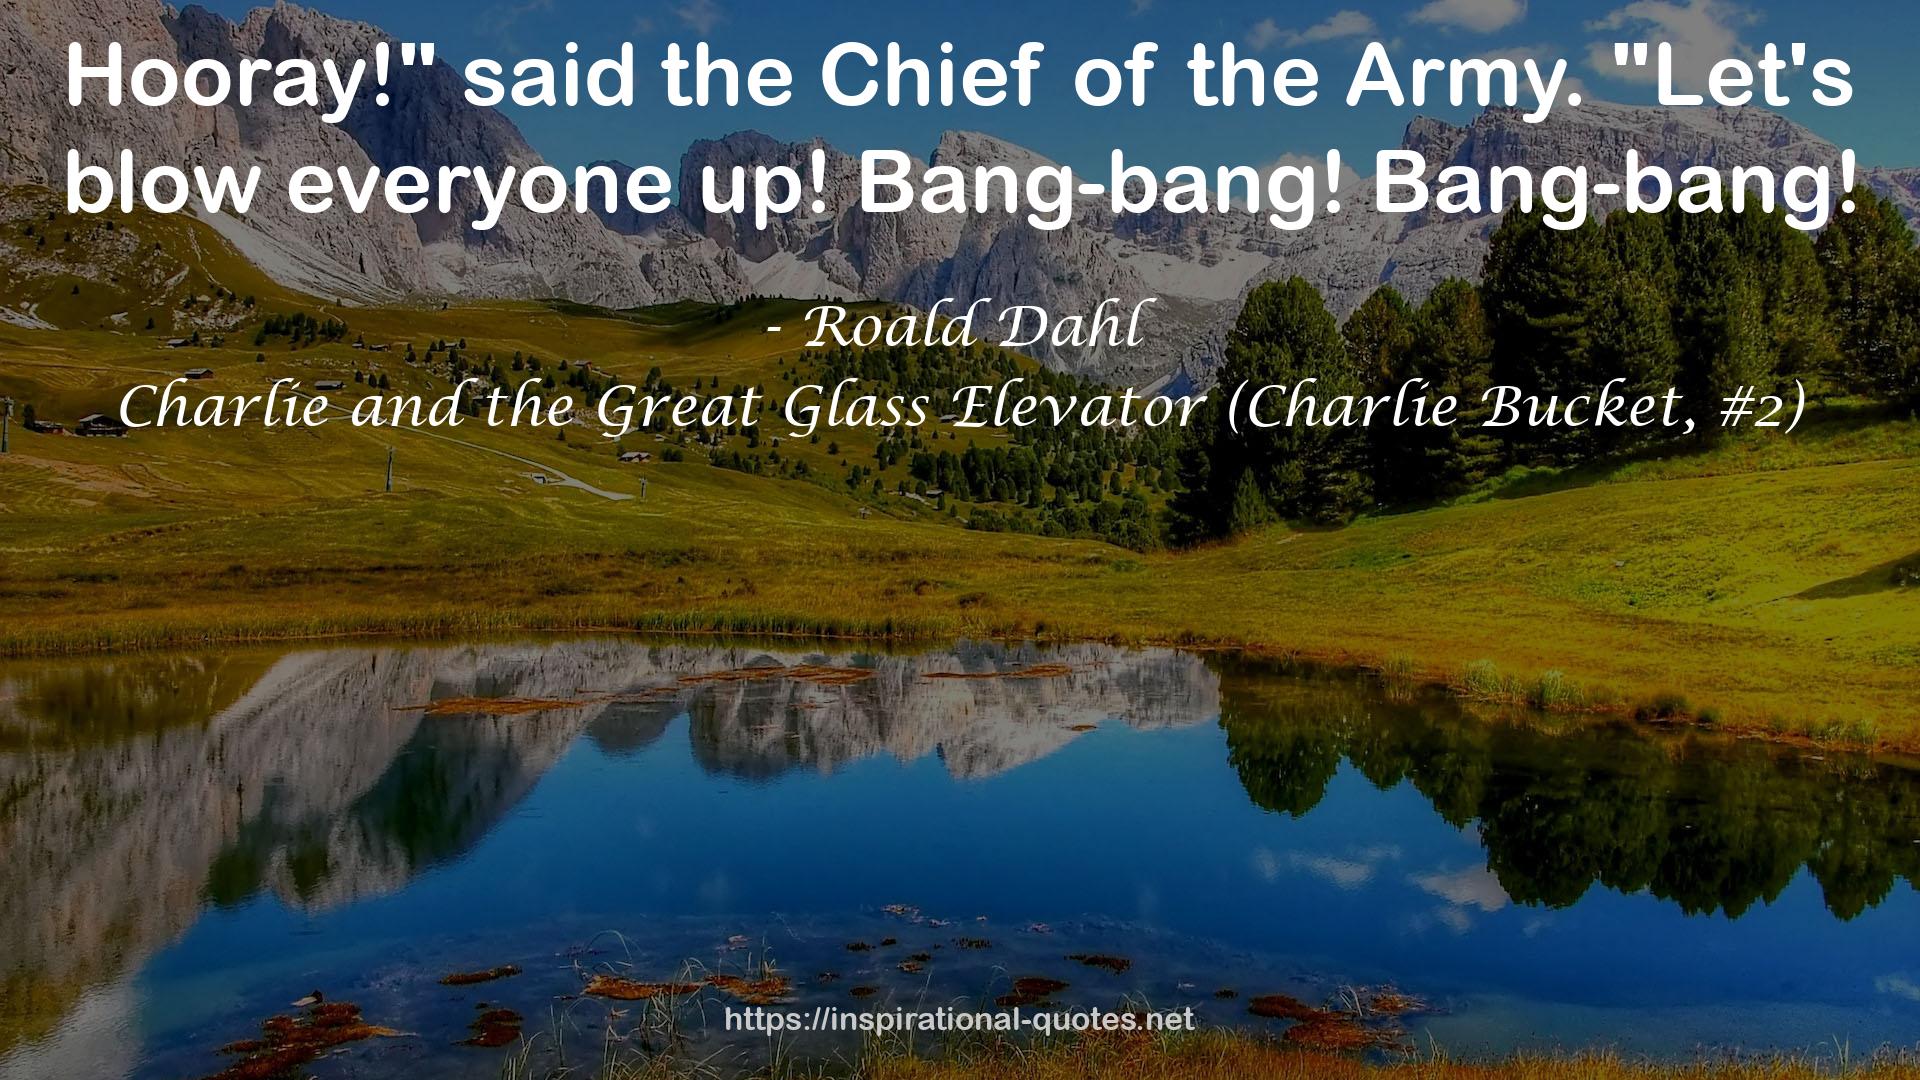 Charlie and the Great Glass Elevator (Charlie Bucket, #2) QUOTES